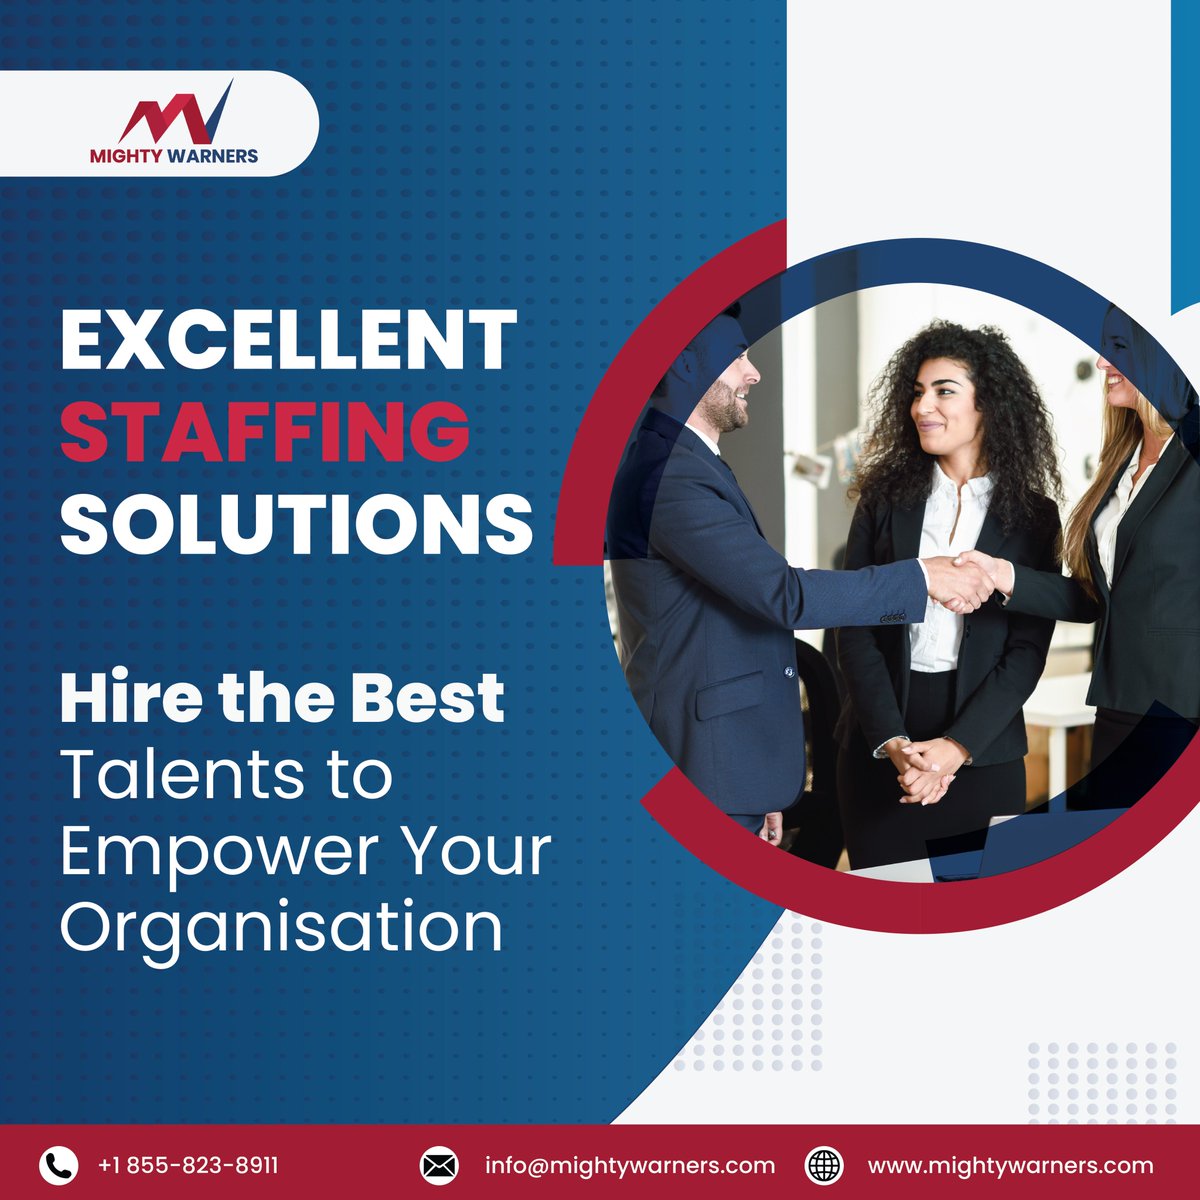 Choose excellence with Mighty Warners. Your key to hiring professionals who align seamlessly with your needs.

#mighthywarner #staffing #business #staffingsolution #recruiting #recruitment #staffingagency #work #sow #career #Paytm_Karo #rain #USA #trending #business #jobs